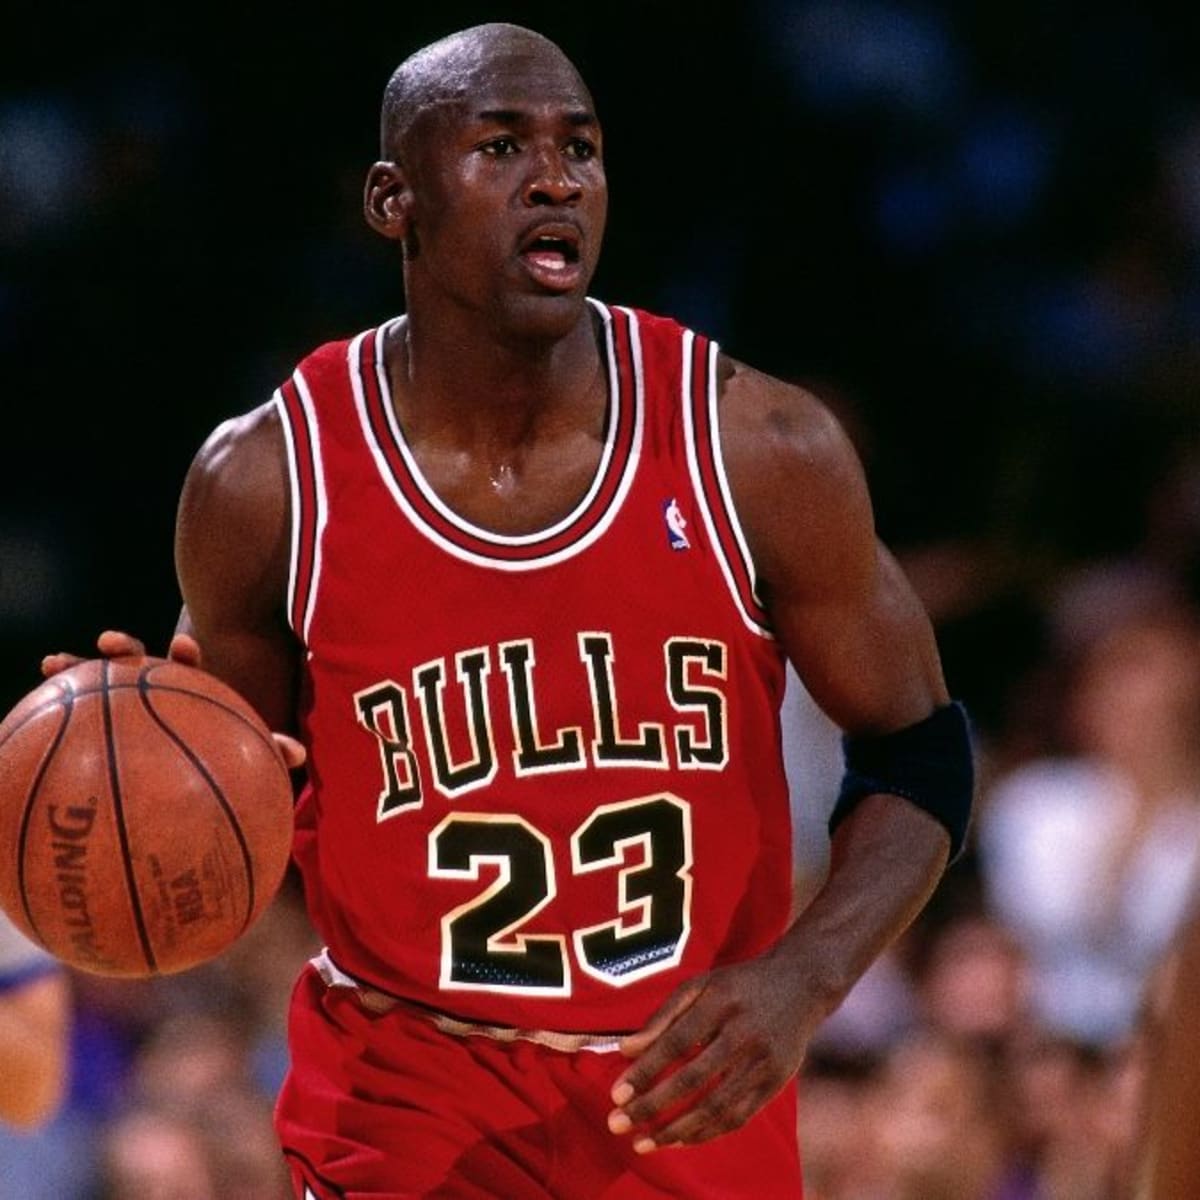 What jersey number did Michael Jordan wear during his playing days?